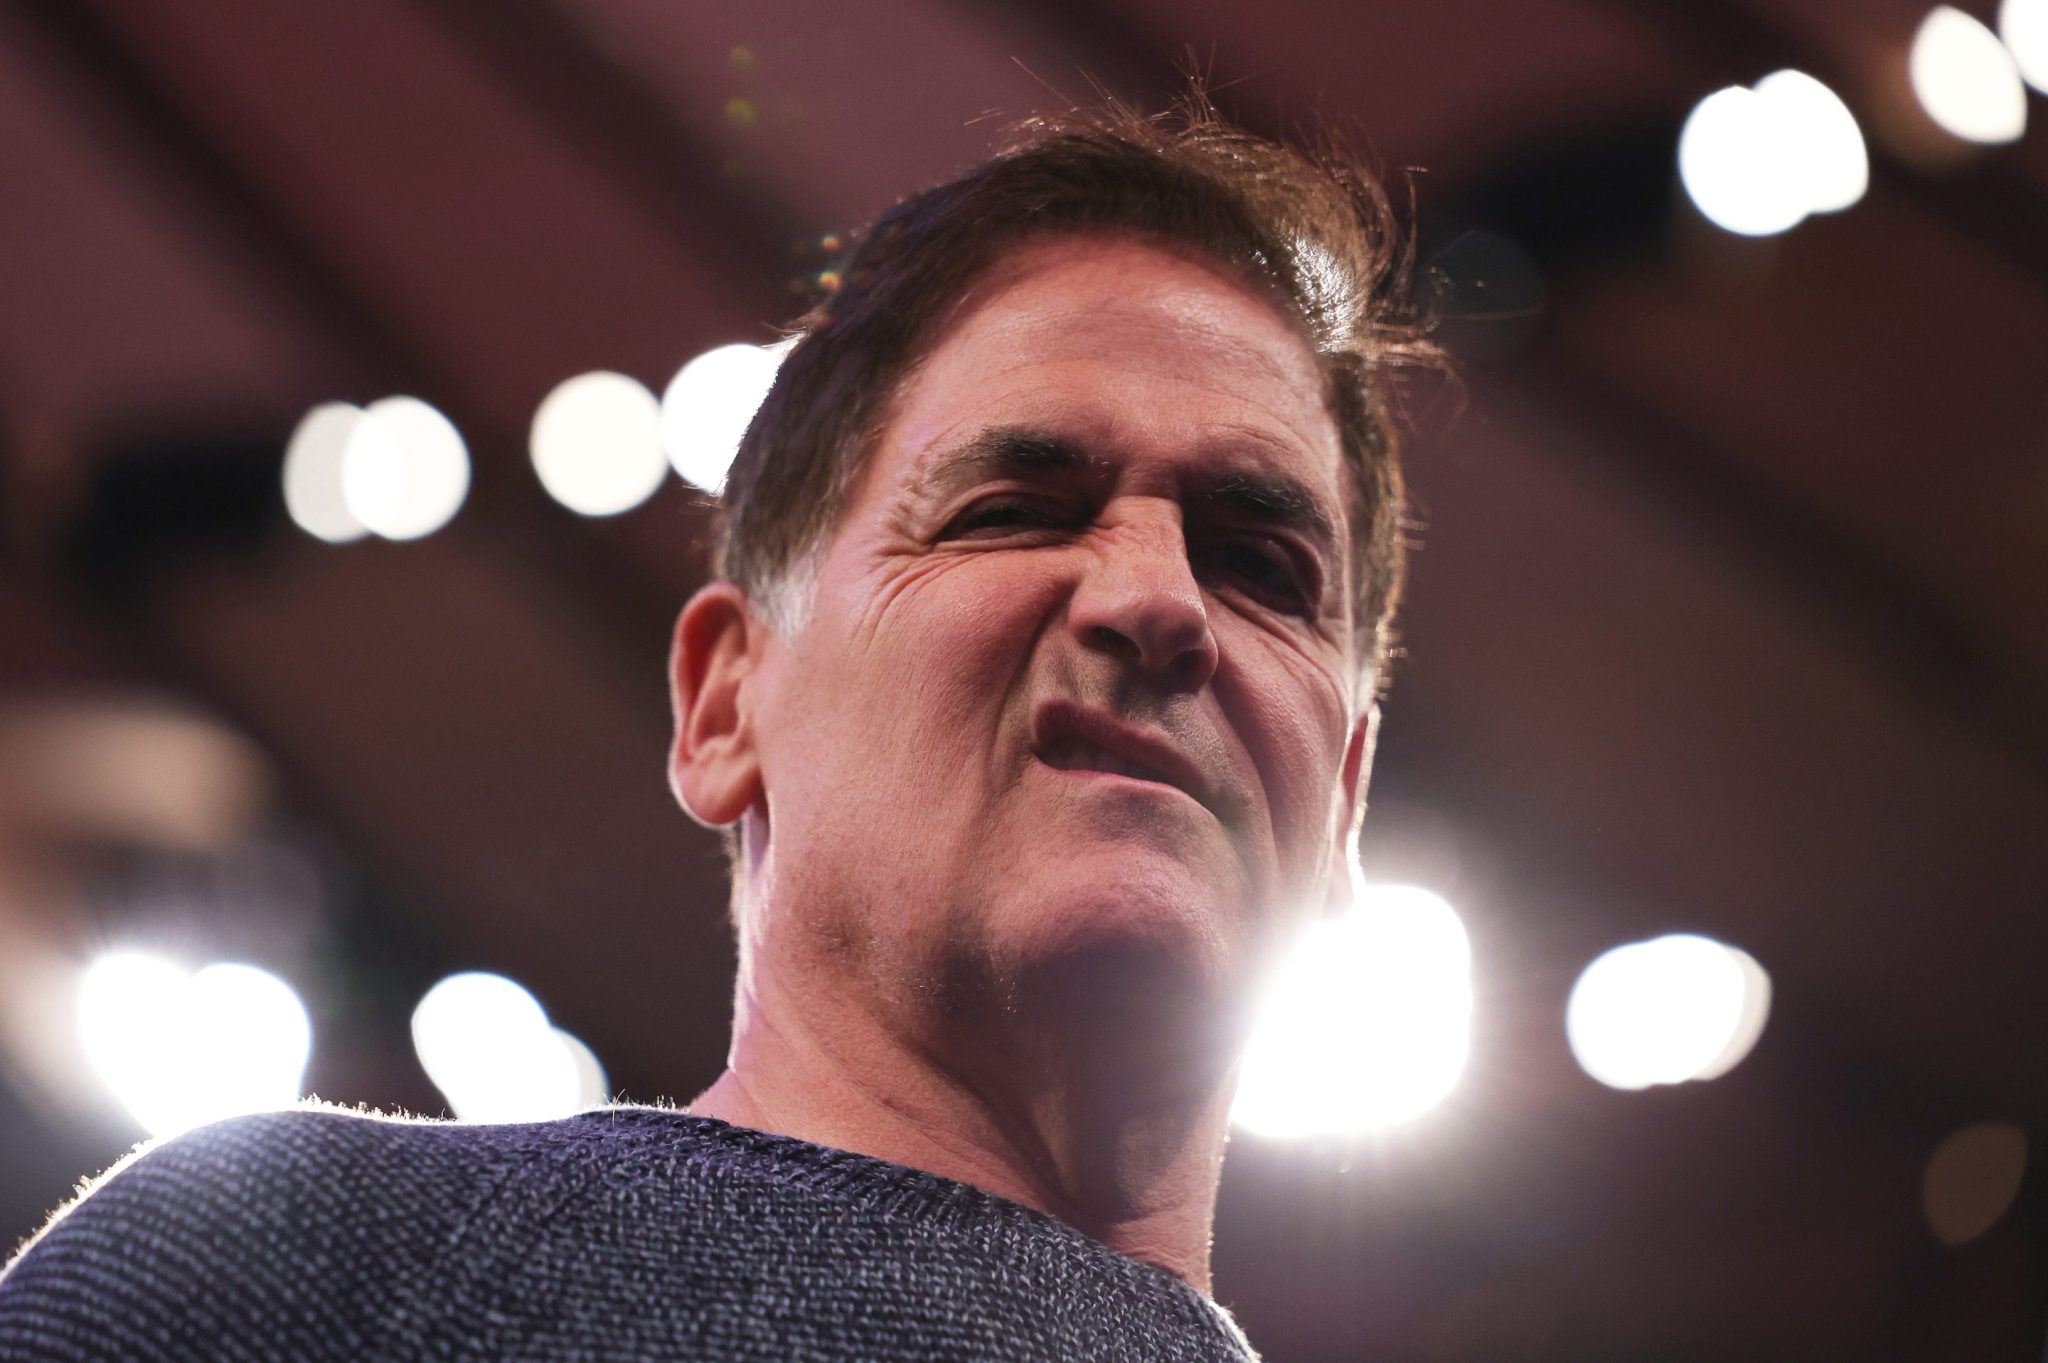 billionaire mark cuban says don’t follow your passions—follow the money and build wealth instead